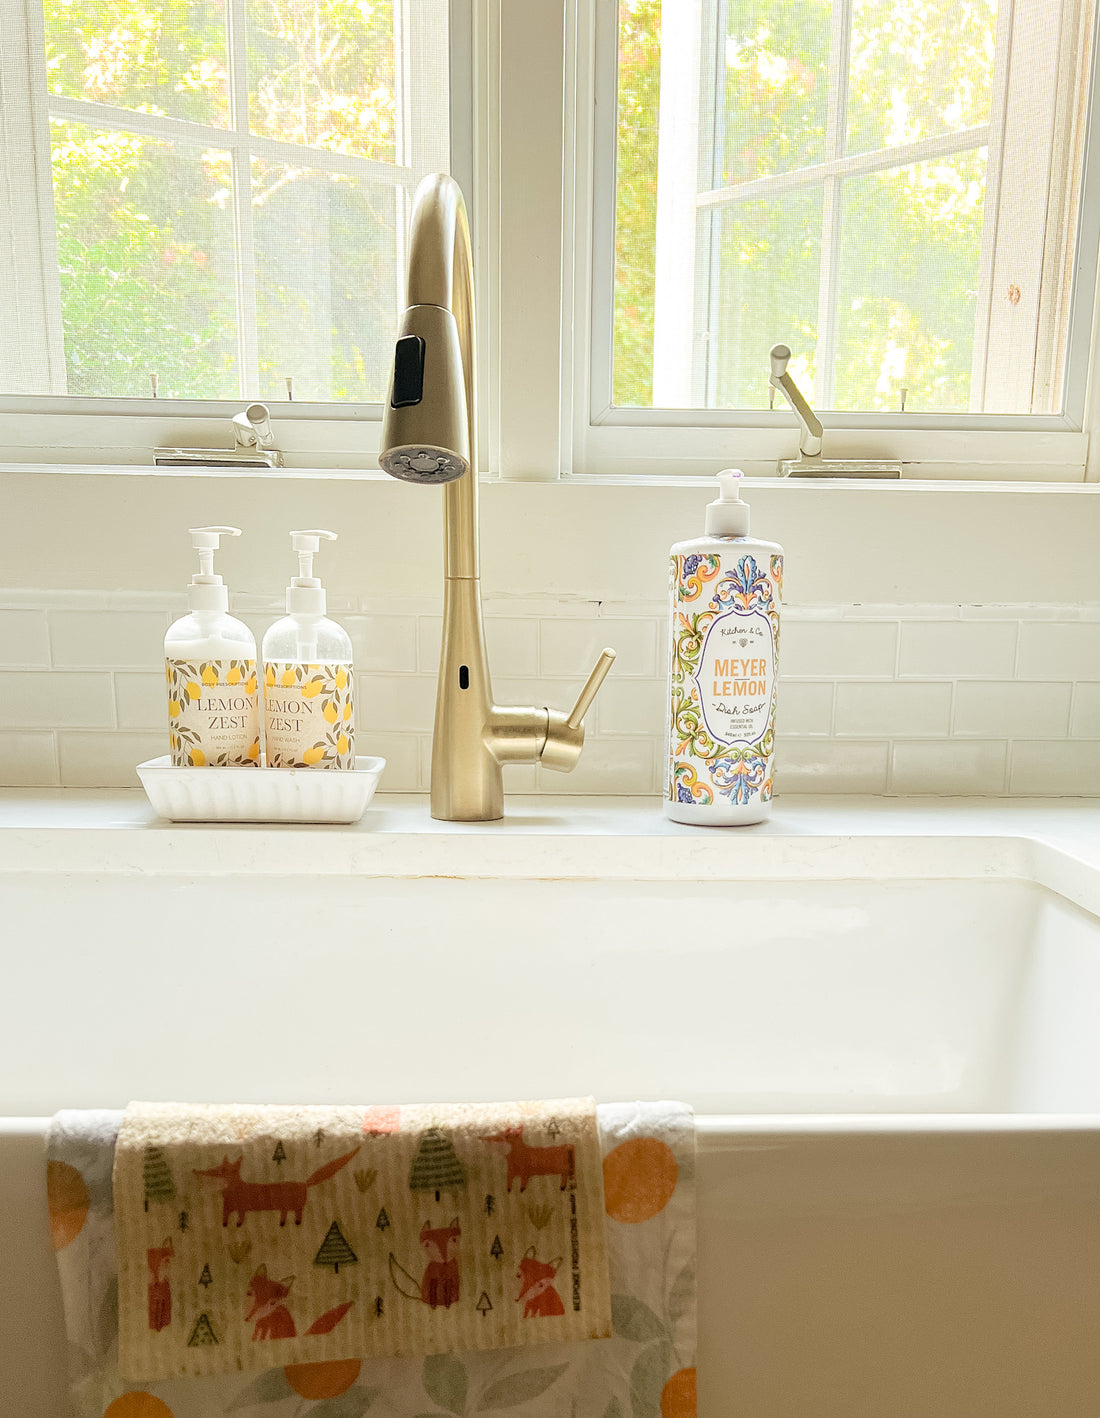 kitchen farmhouse sink with soap, kitchen towel and sunlight